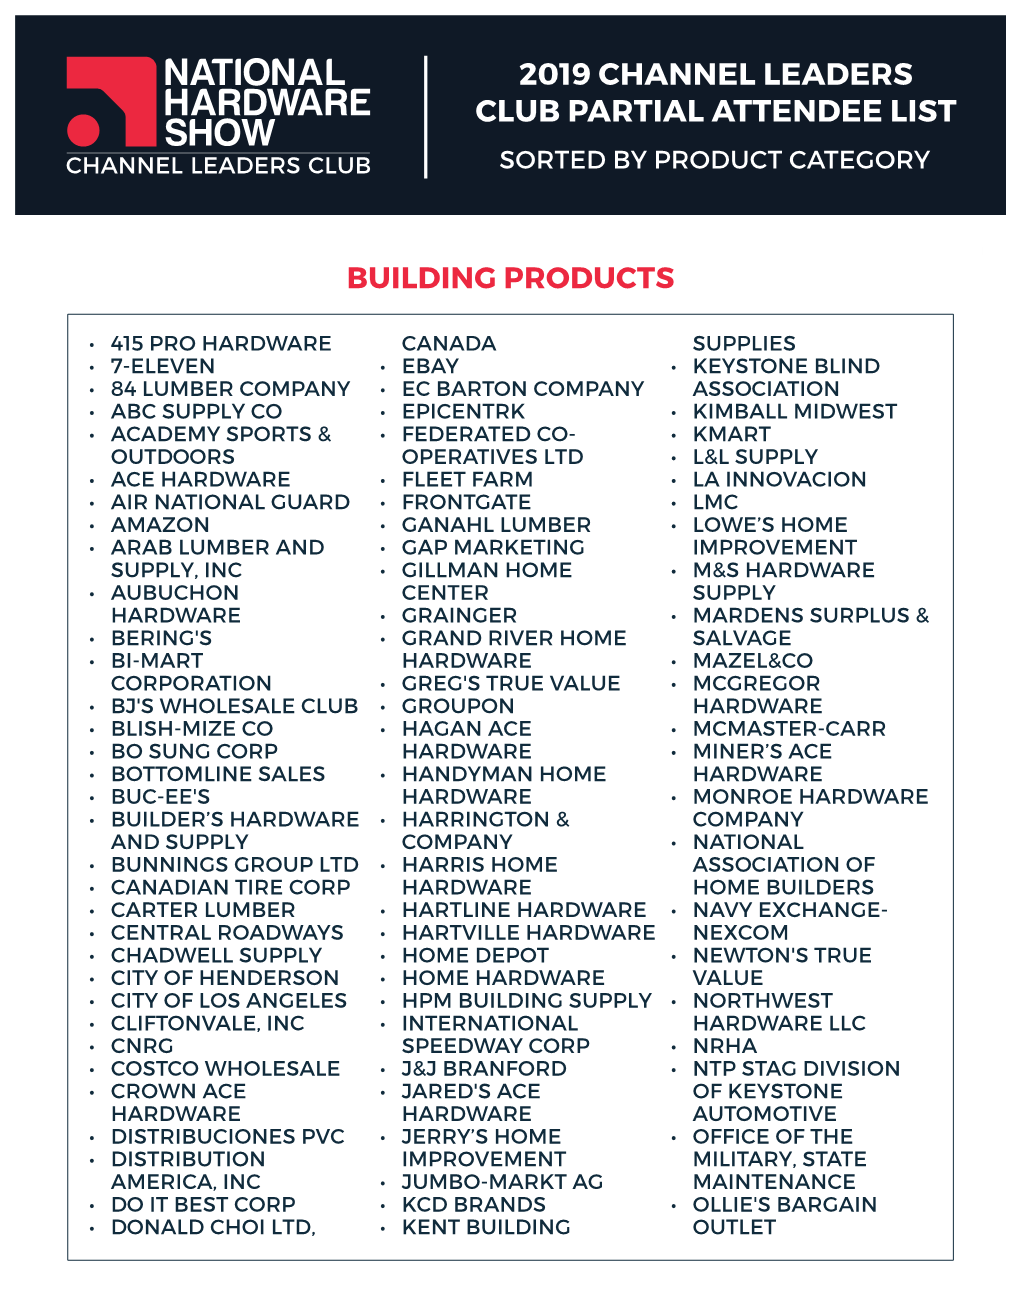 2019 Channel Leaders Club Partial Attendee List Sorted by Product Category